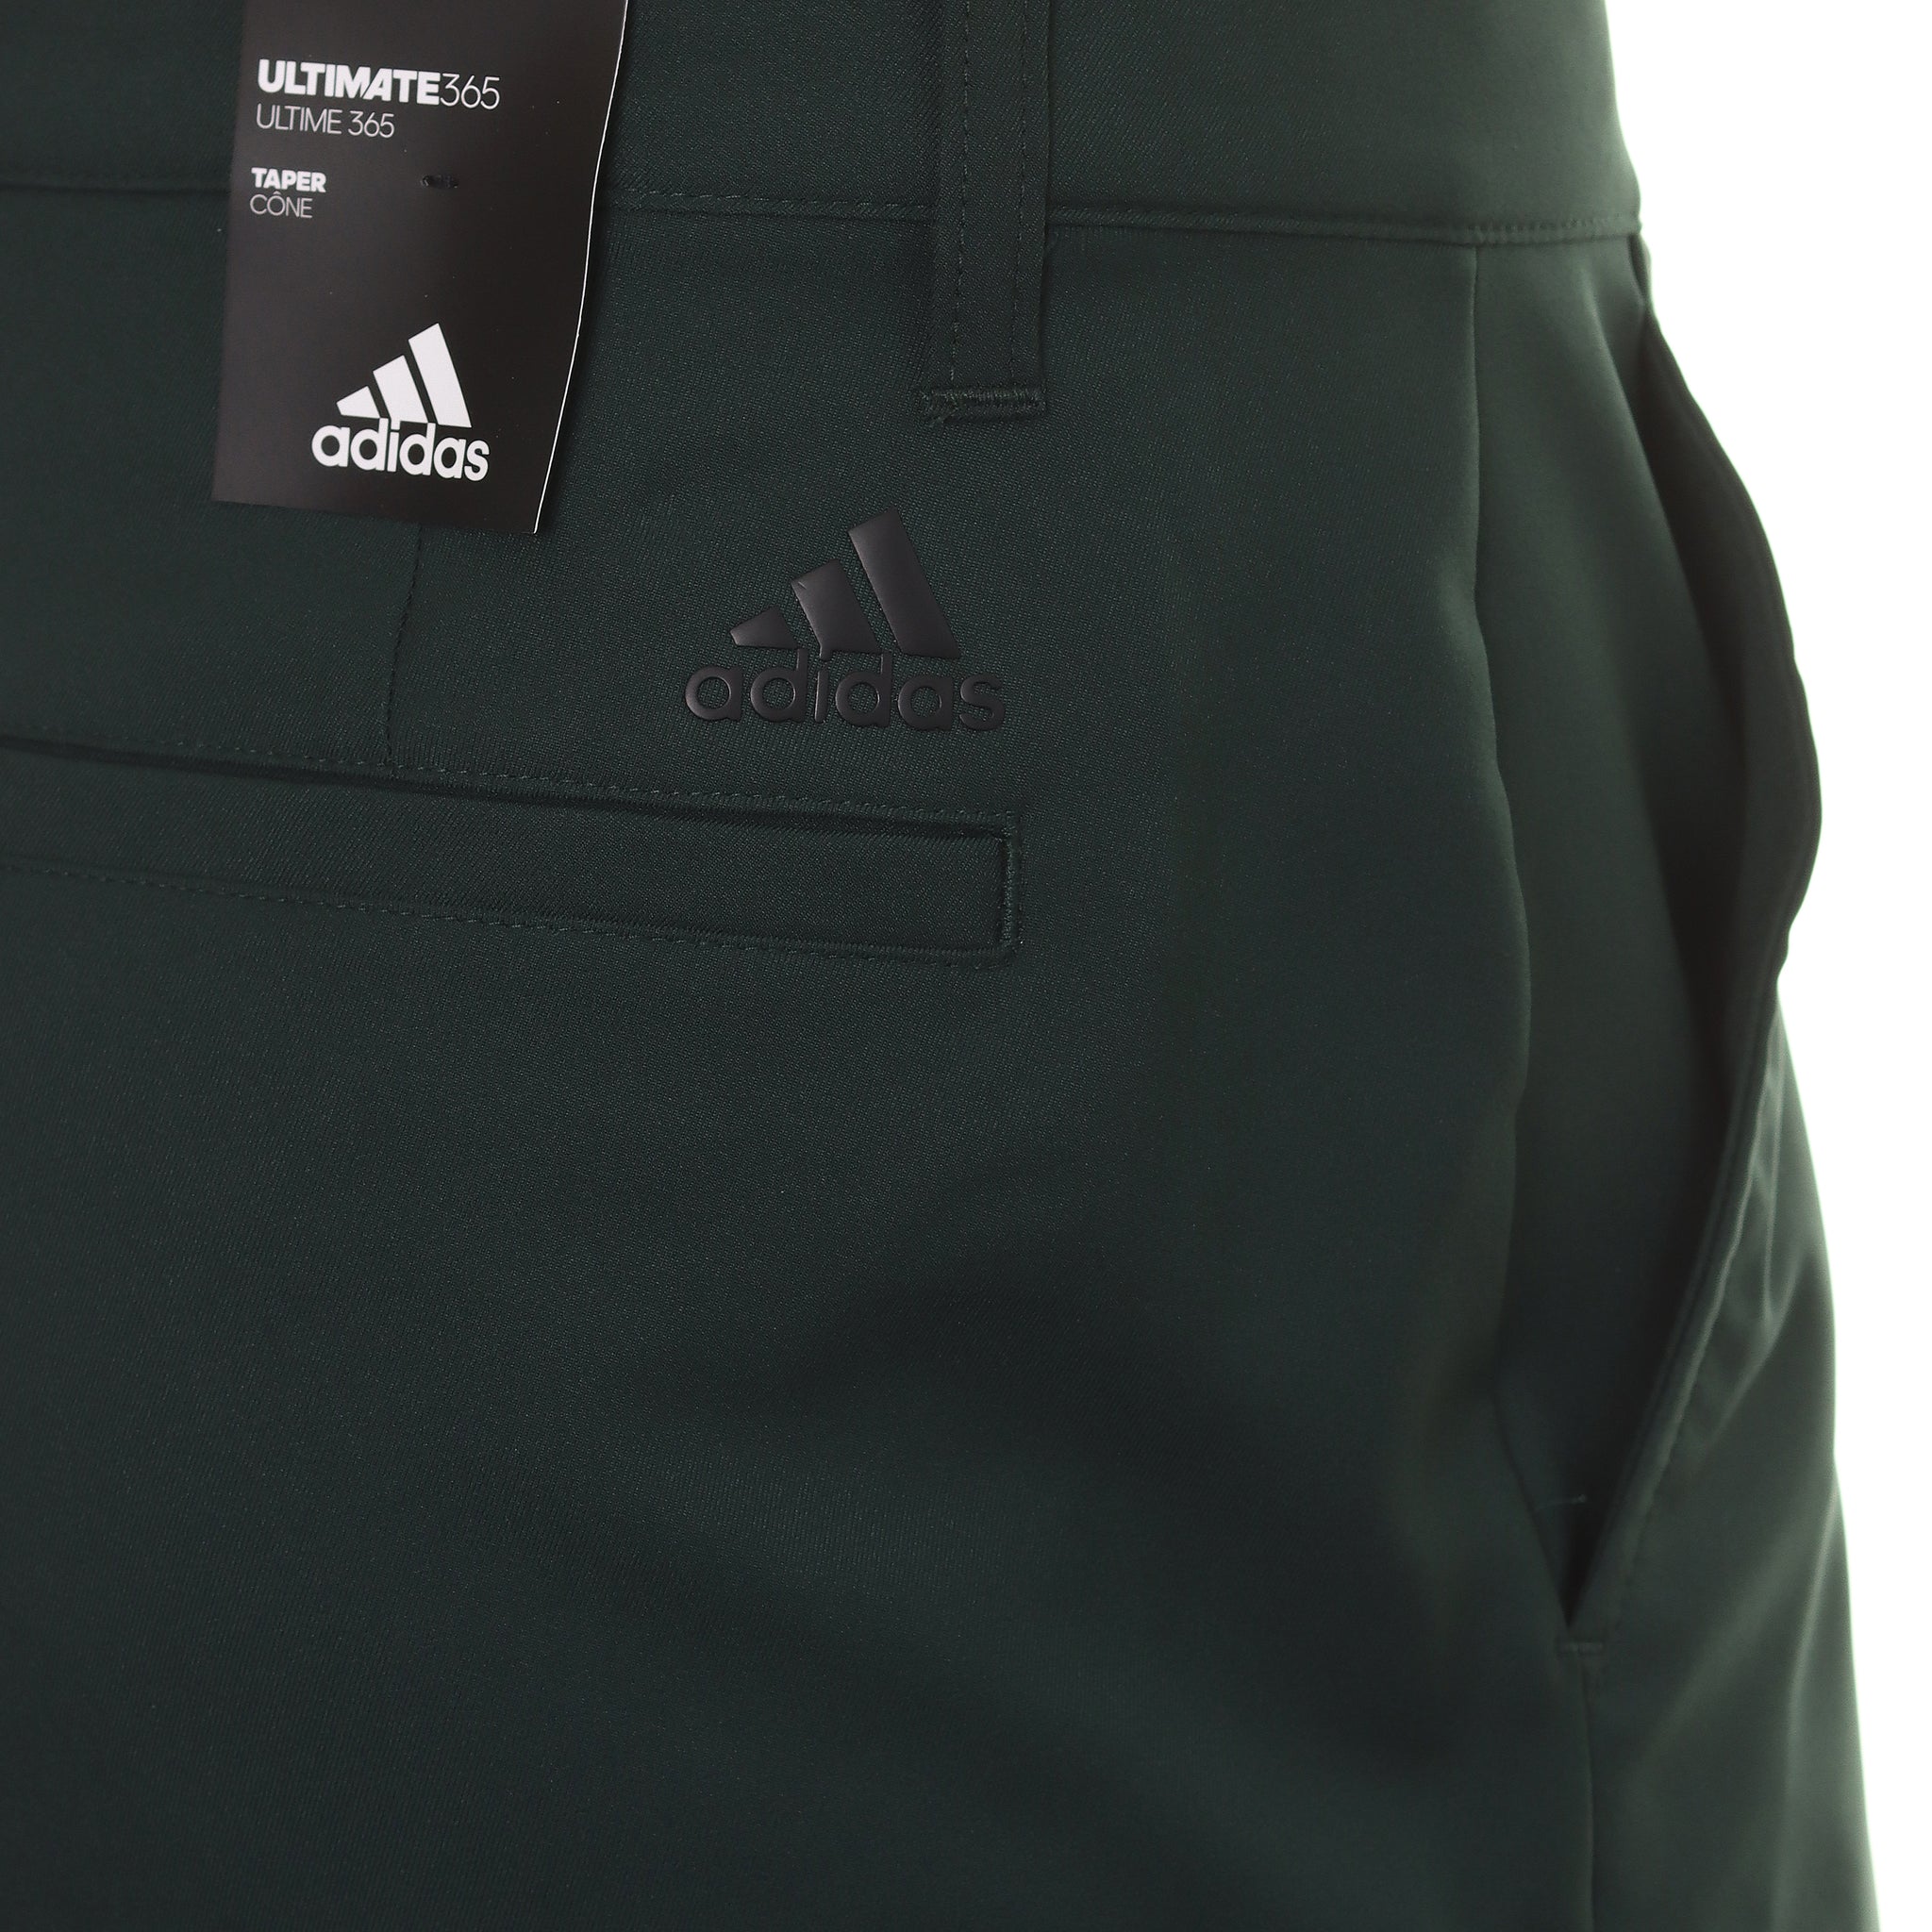 adidas-golf-ultimate365-tapered-pants-hm3230-shadow-green-function18